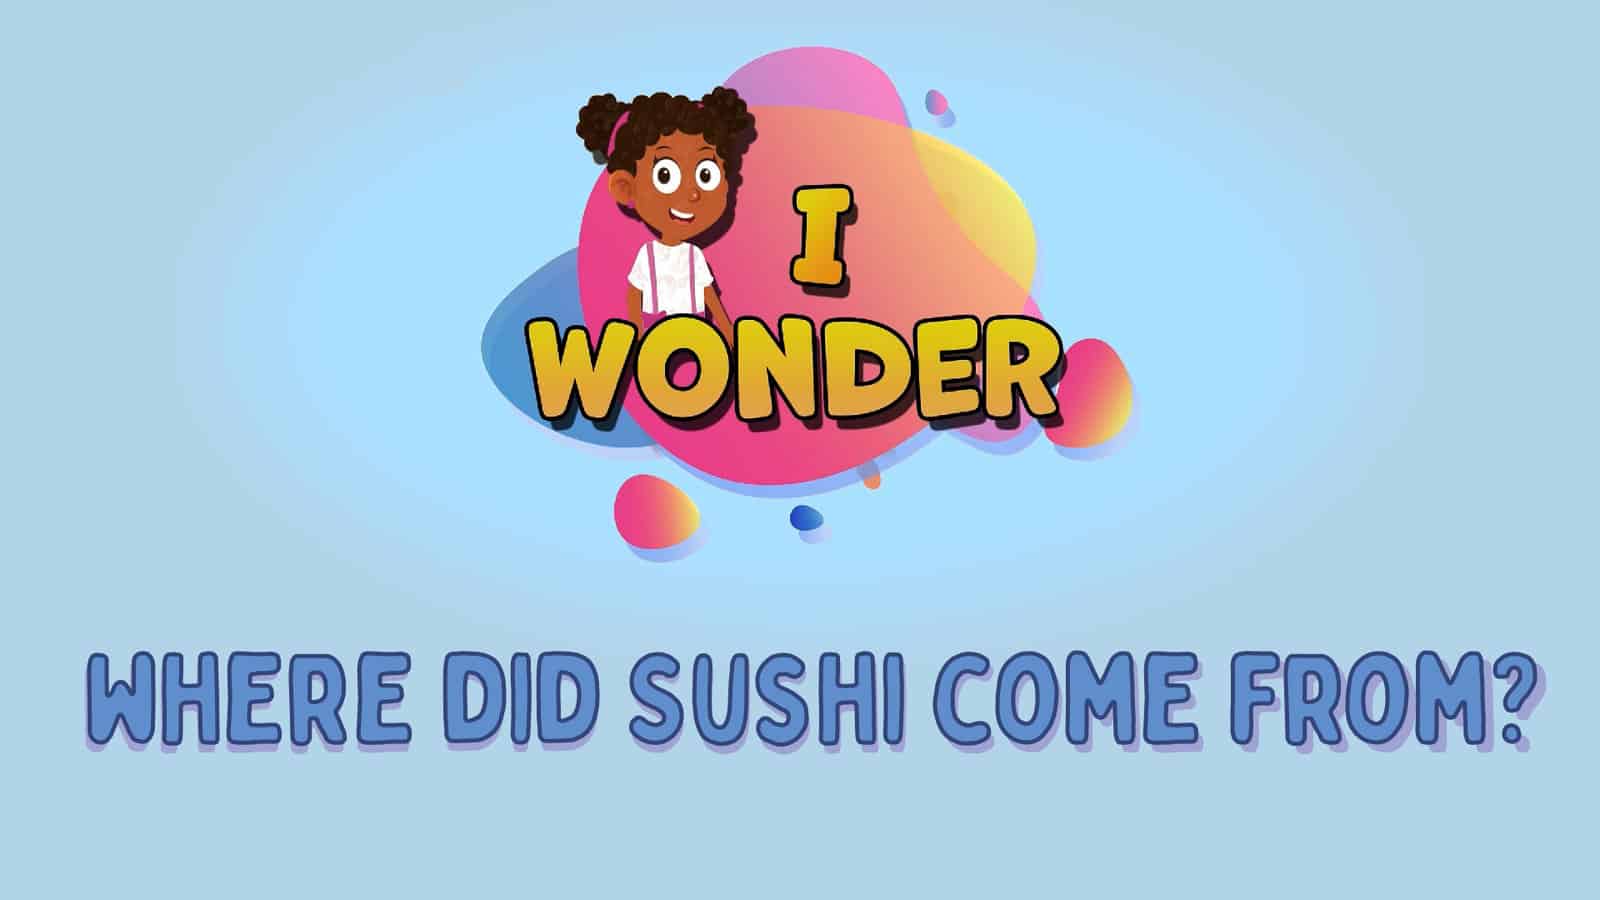 Where Did Sushi Come From?